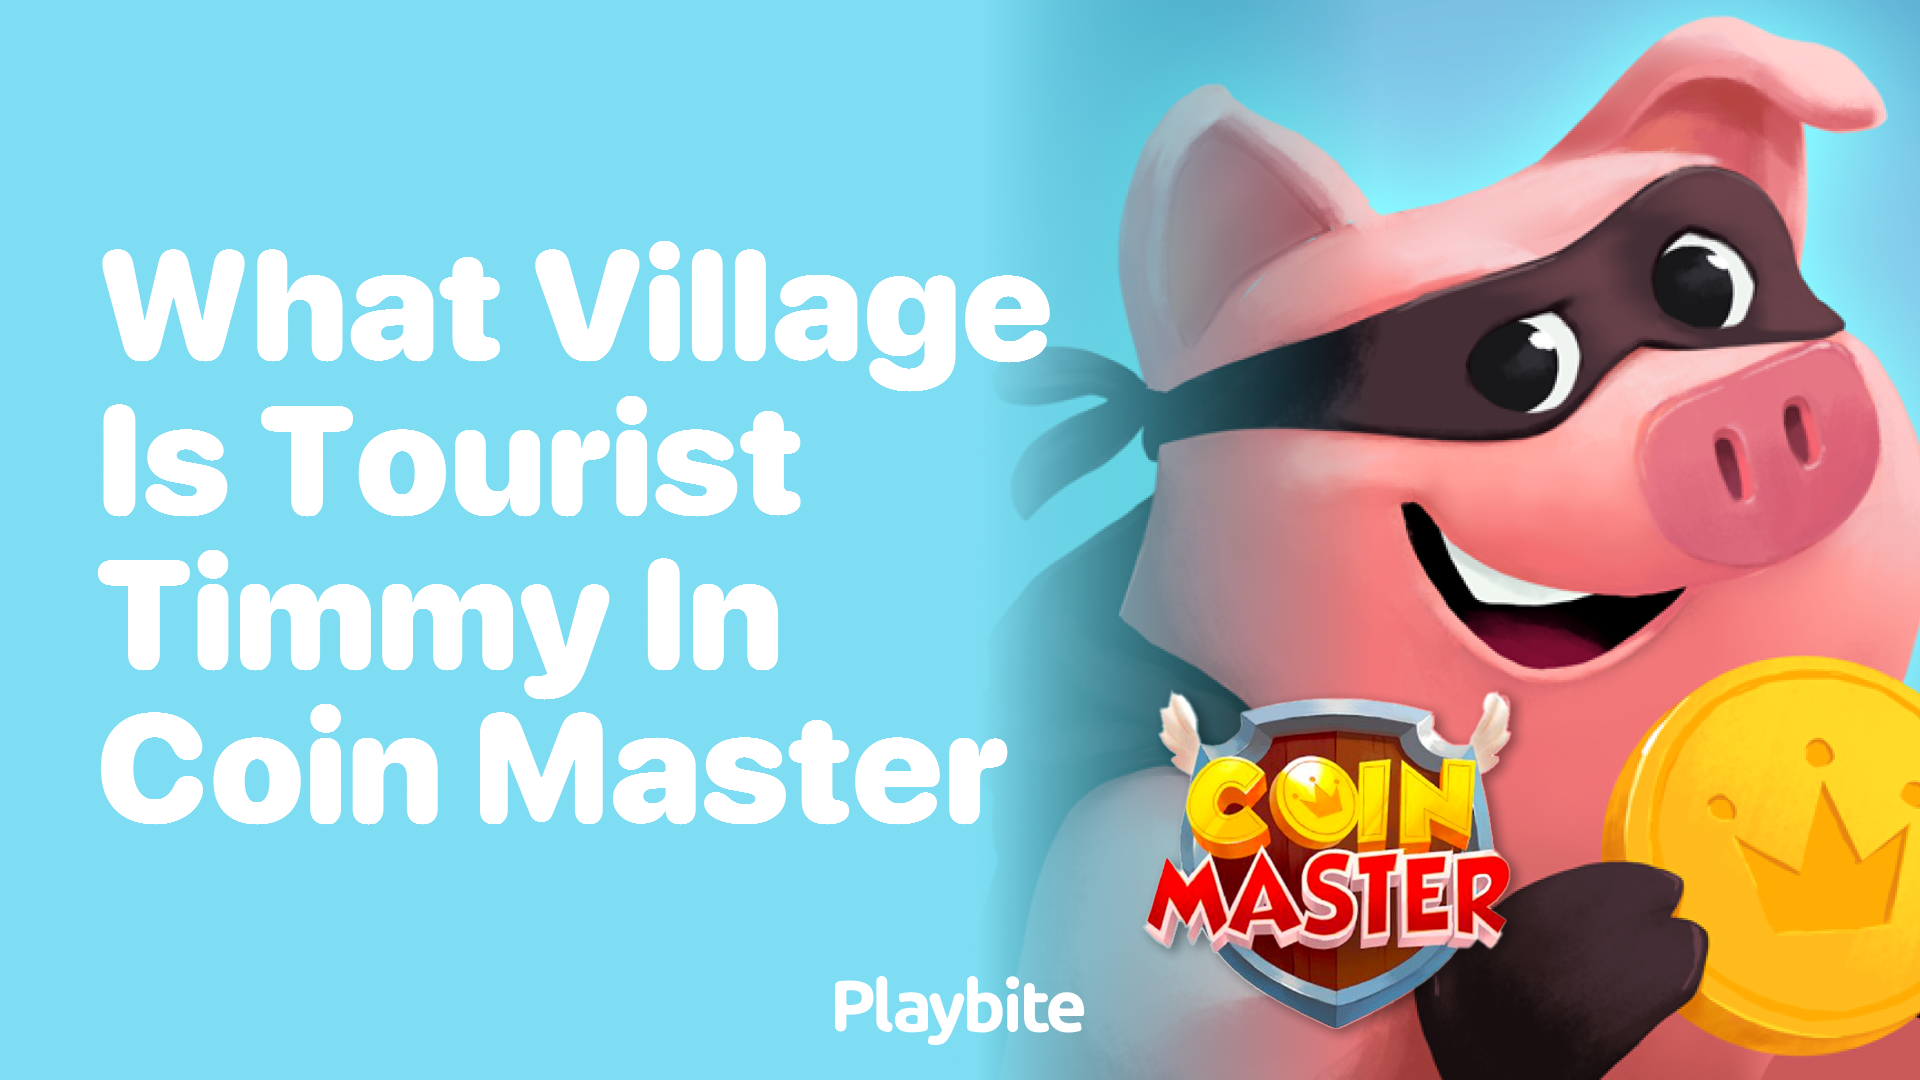 What Village Is Tourist Timmy In Coin Master?